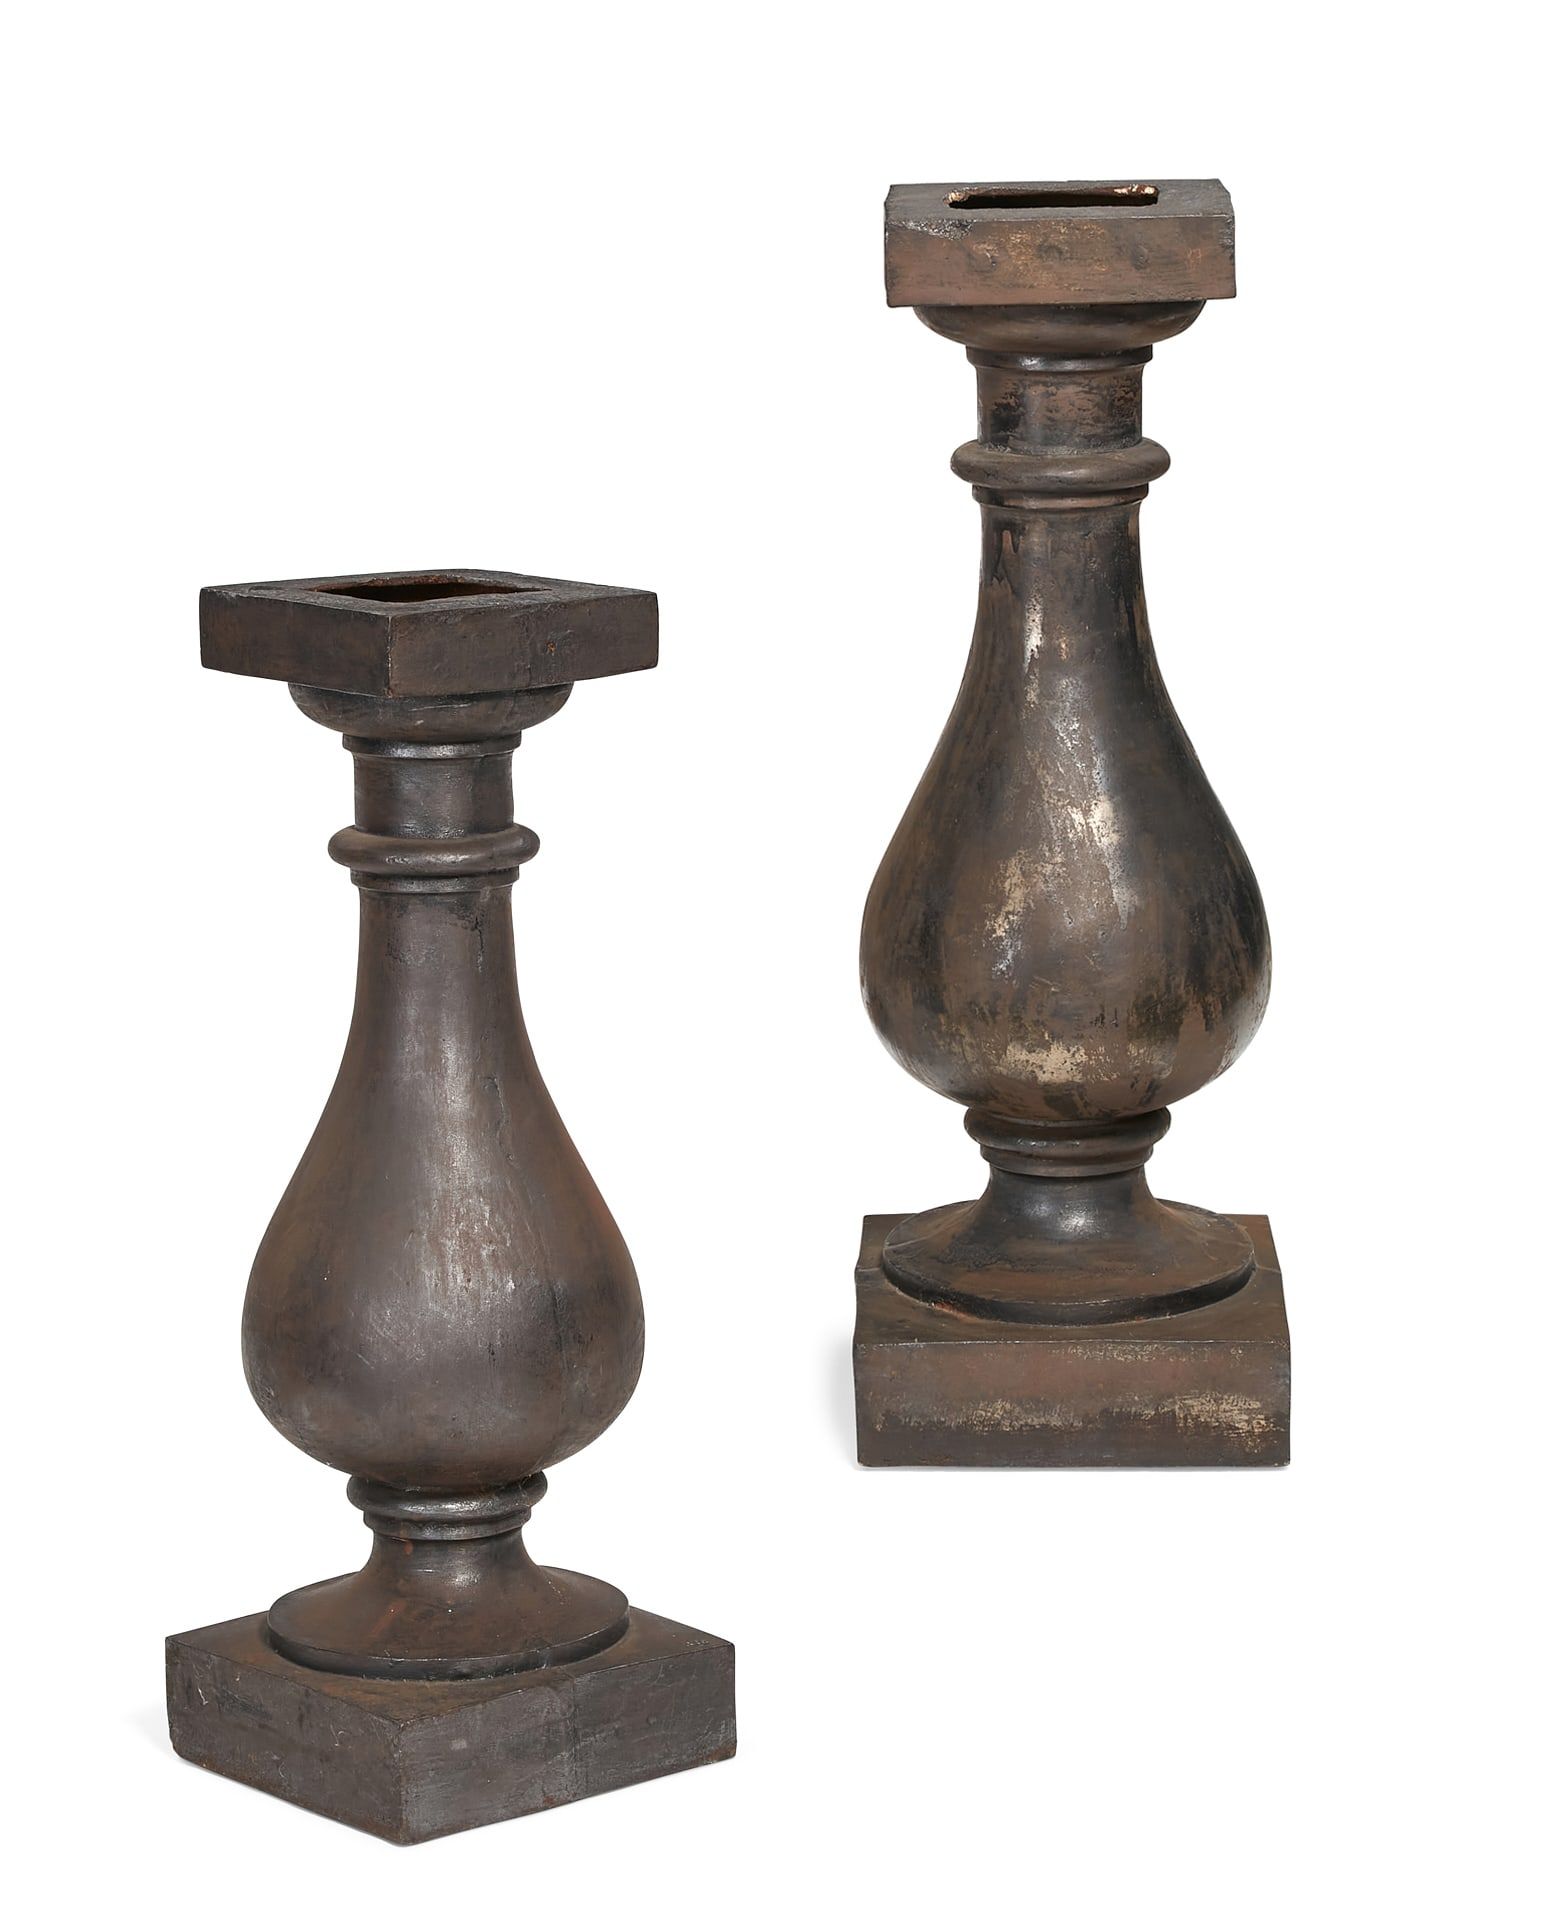 A PAIR OF NEOCLASSICAL STYLE CAST